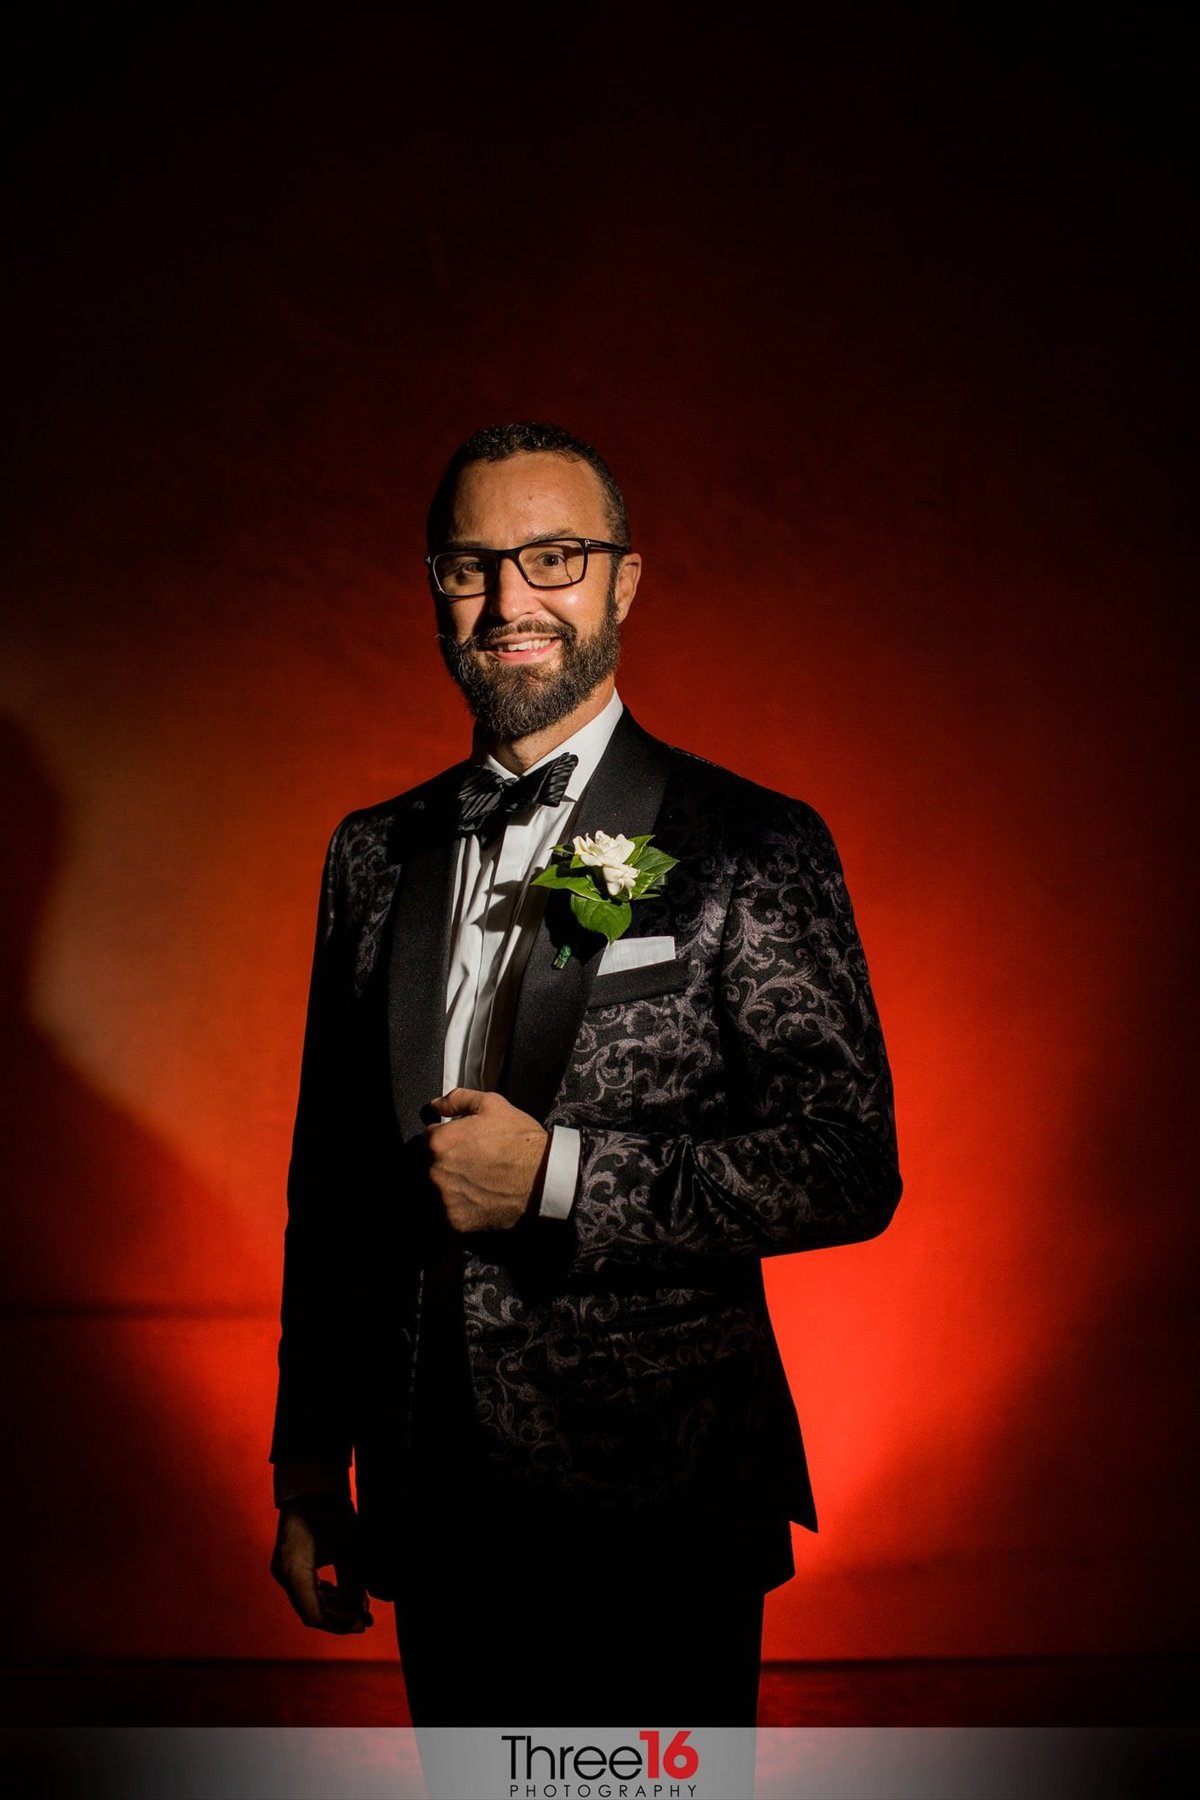 Groom poses with awesome red back light